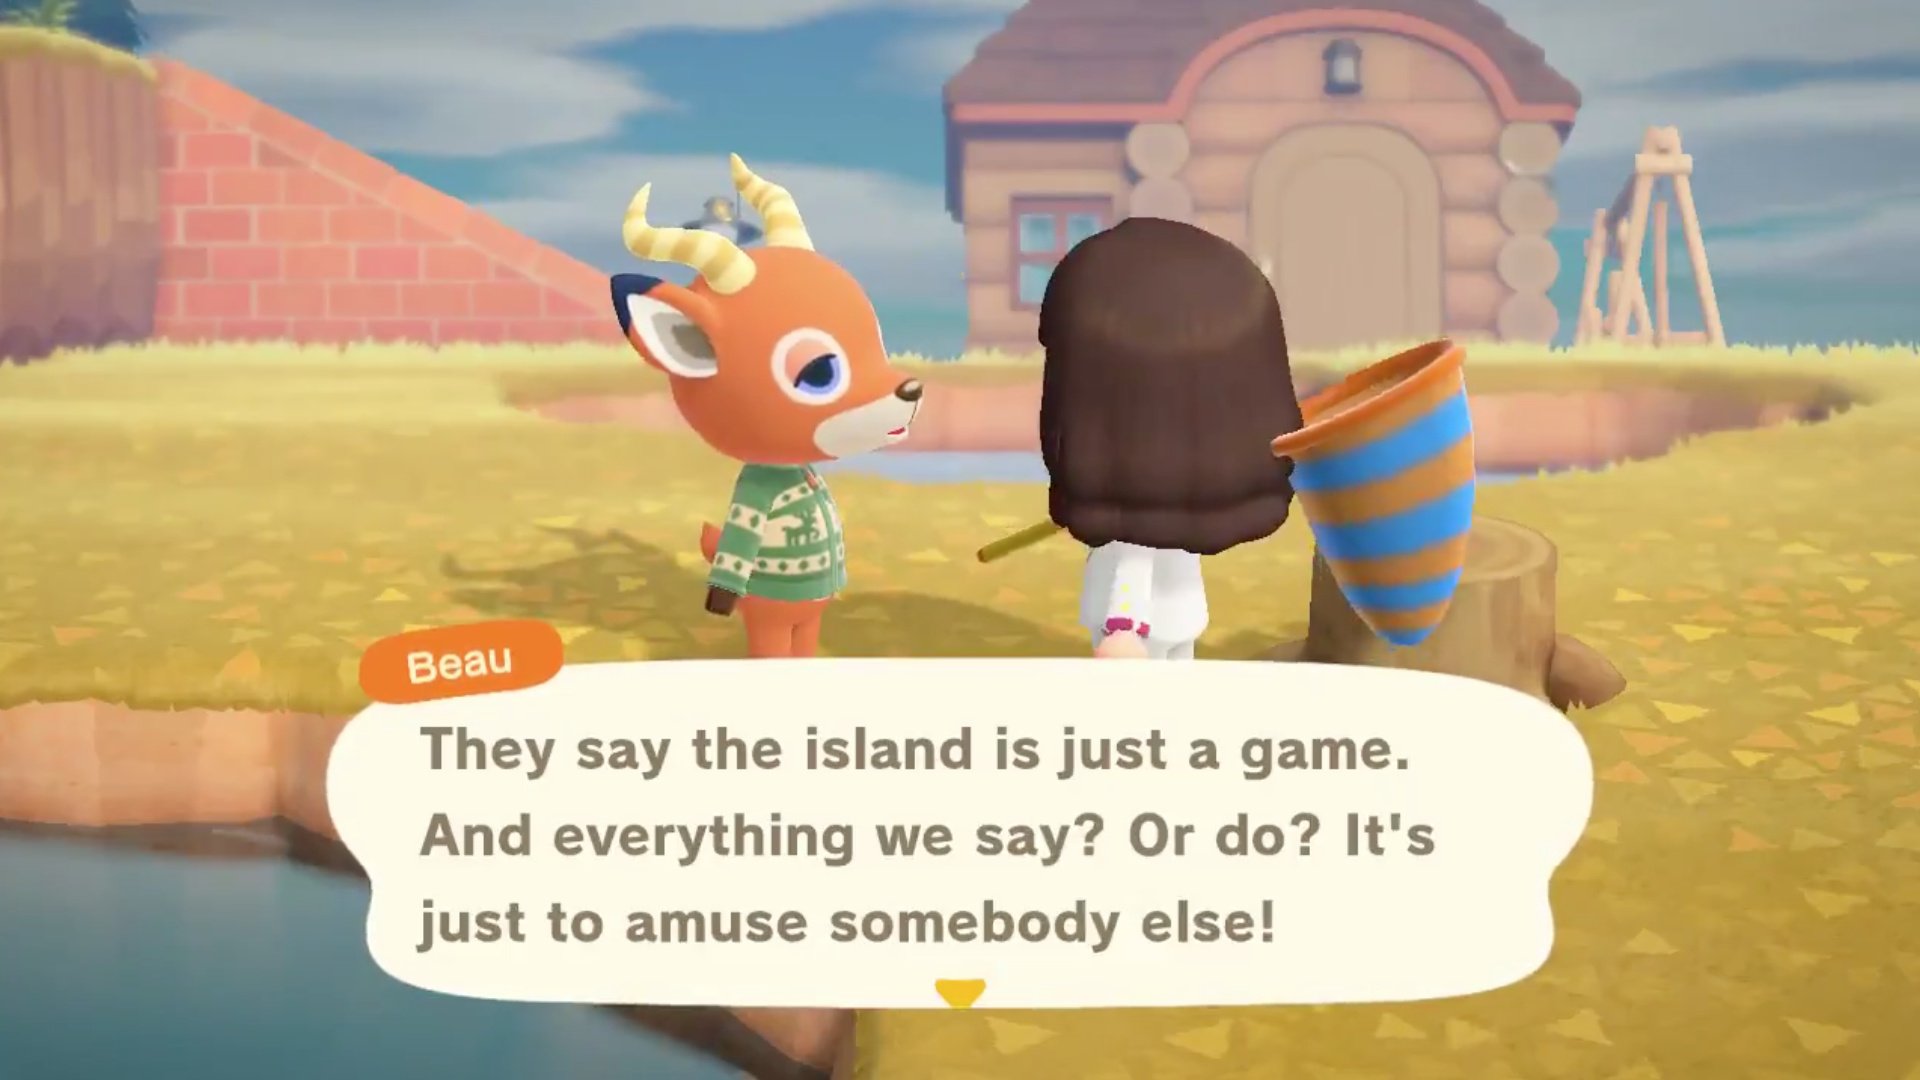 Random Is The World Of Animal Crossing New Horizons All A Lie